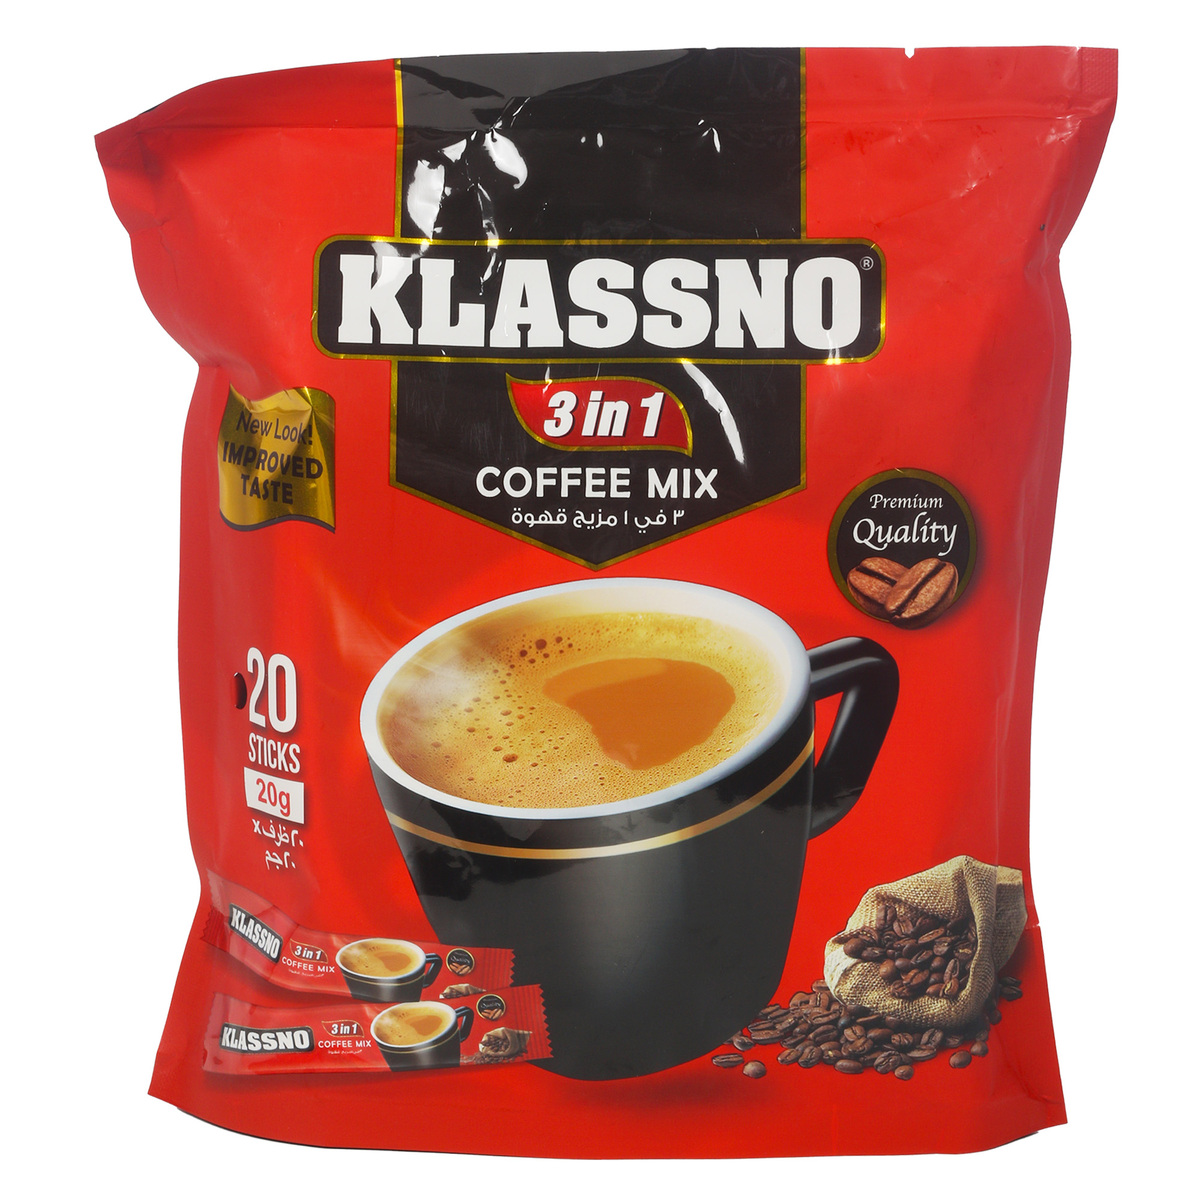 Klassno 3 in 1 Coffee Mix Value Pack 20 x 20 g